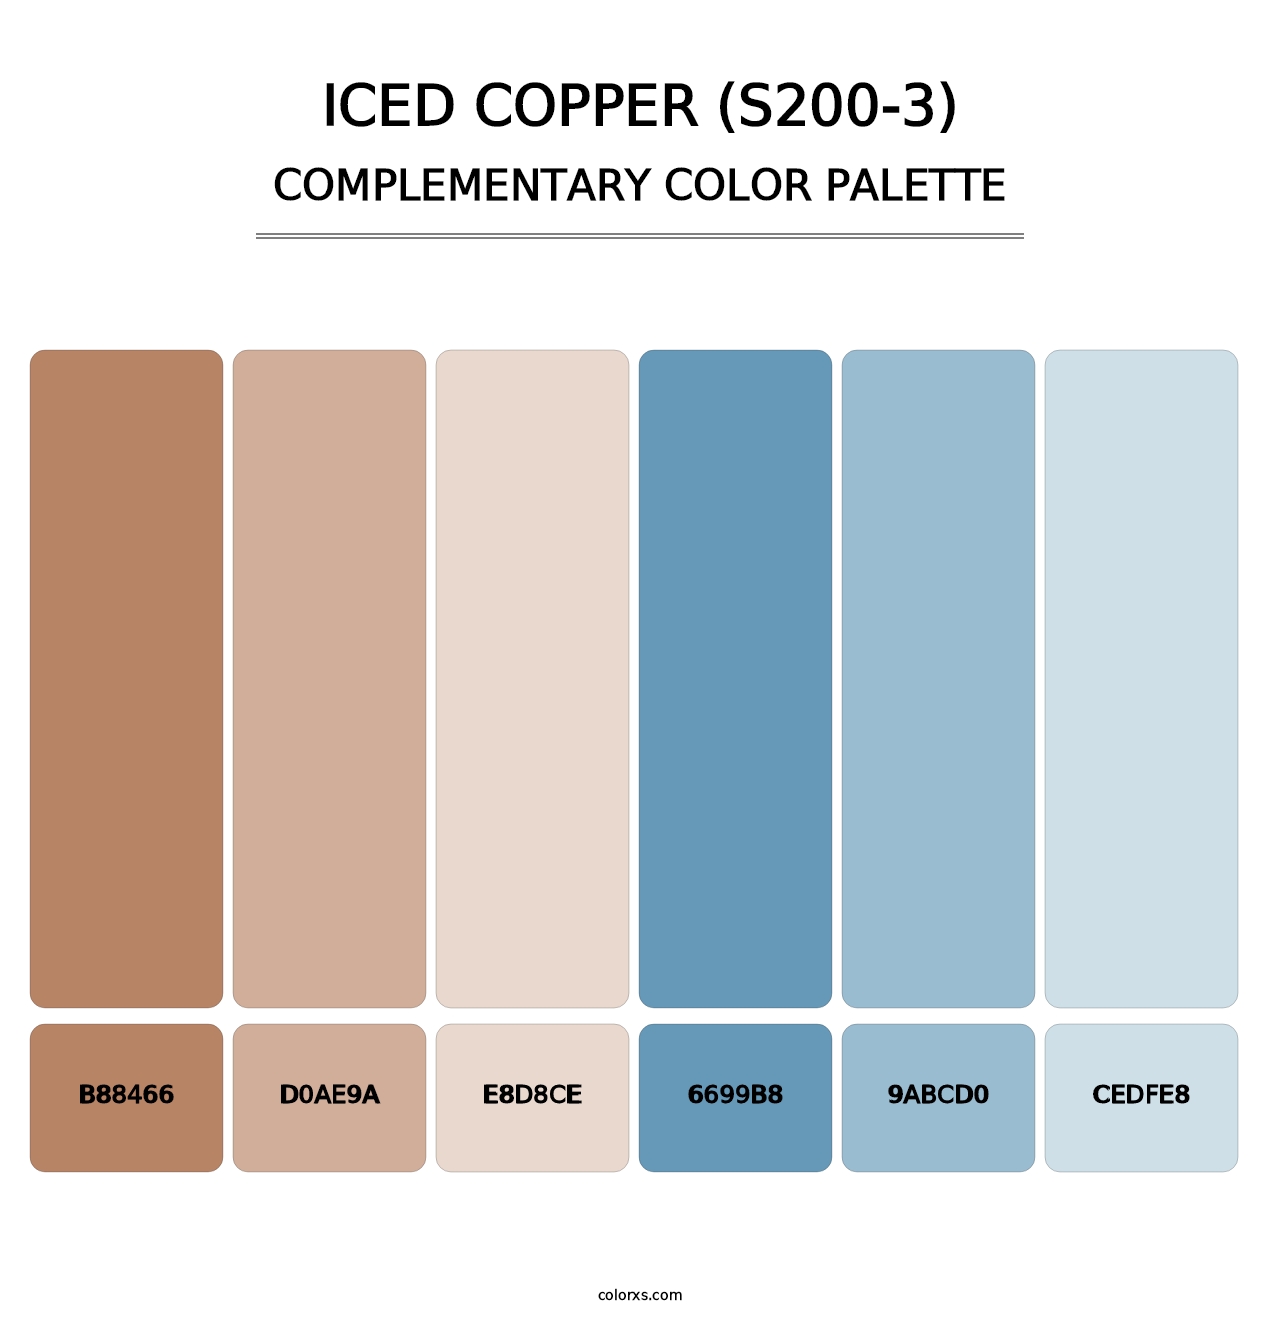 Iced Copper (S200-3) - Complementary Color Palette